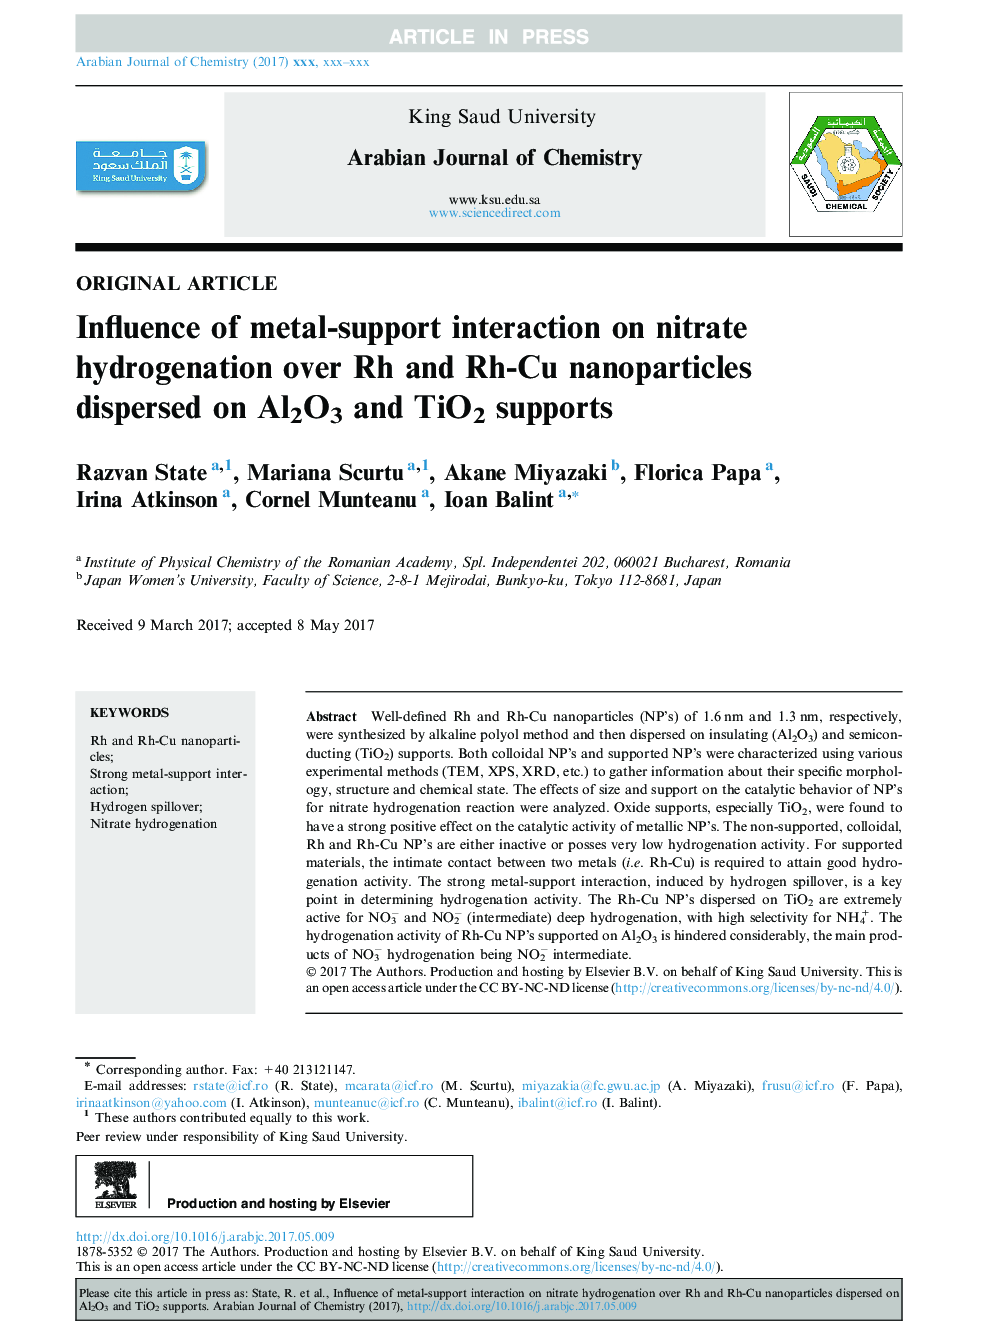 Influence of metal-support interaction on nitrate hydrogenation over Rh and Rh-Cu nanoparticles dispersed on Al2O3 and TiO2 supports